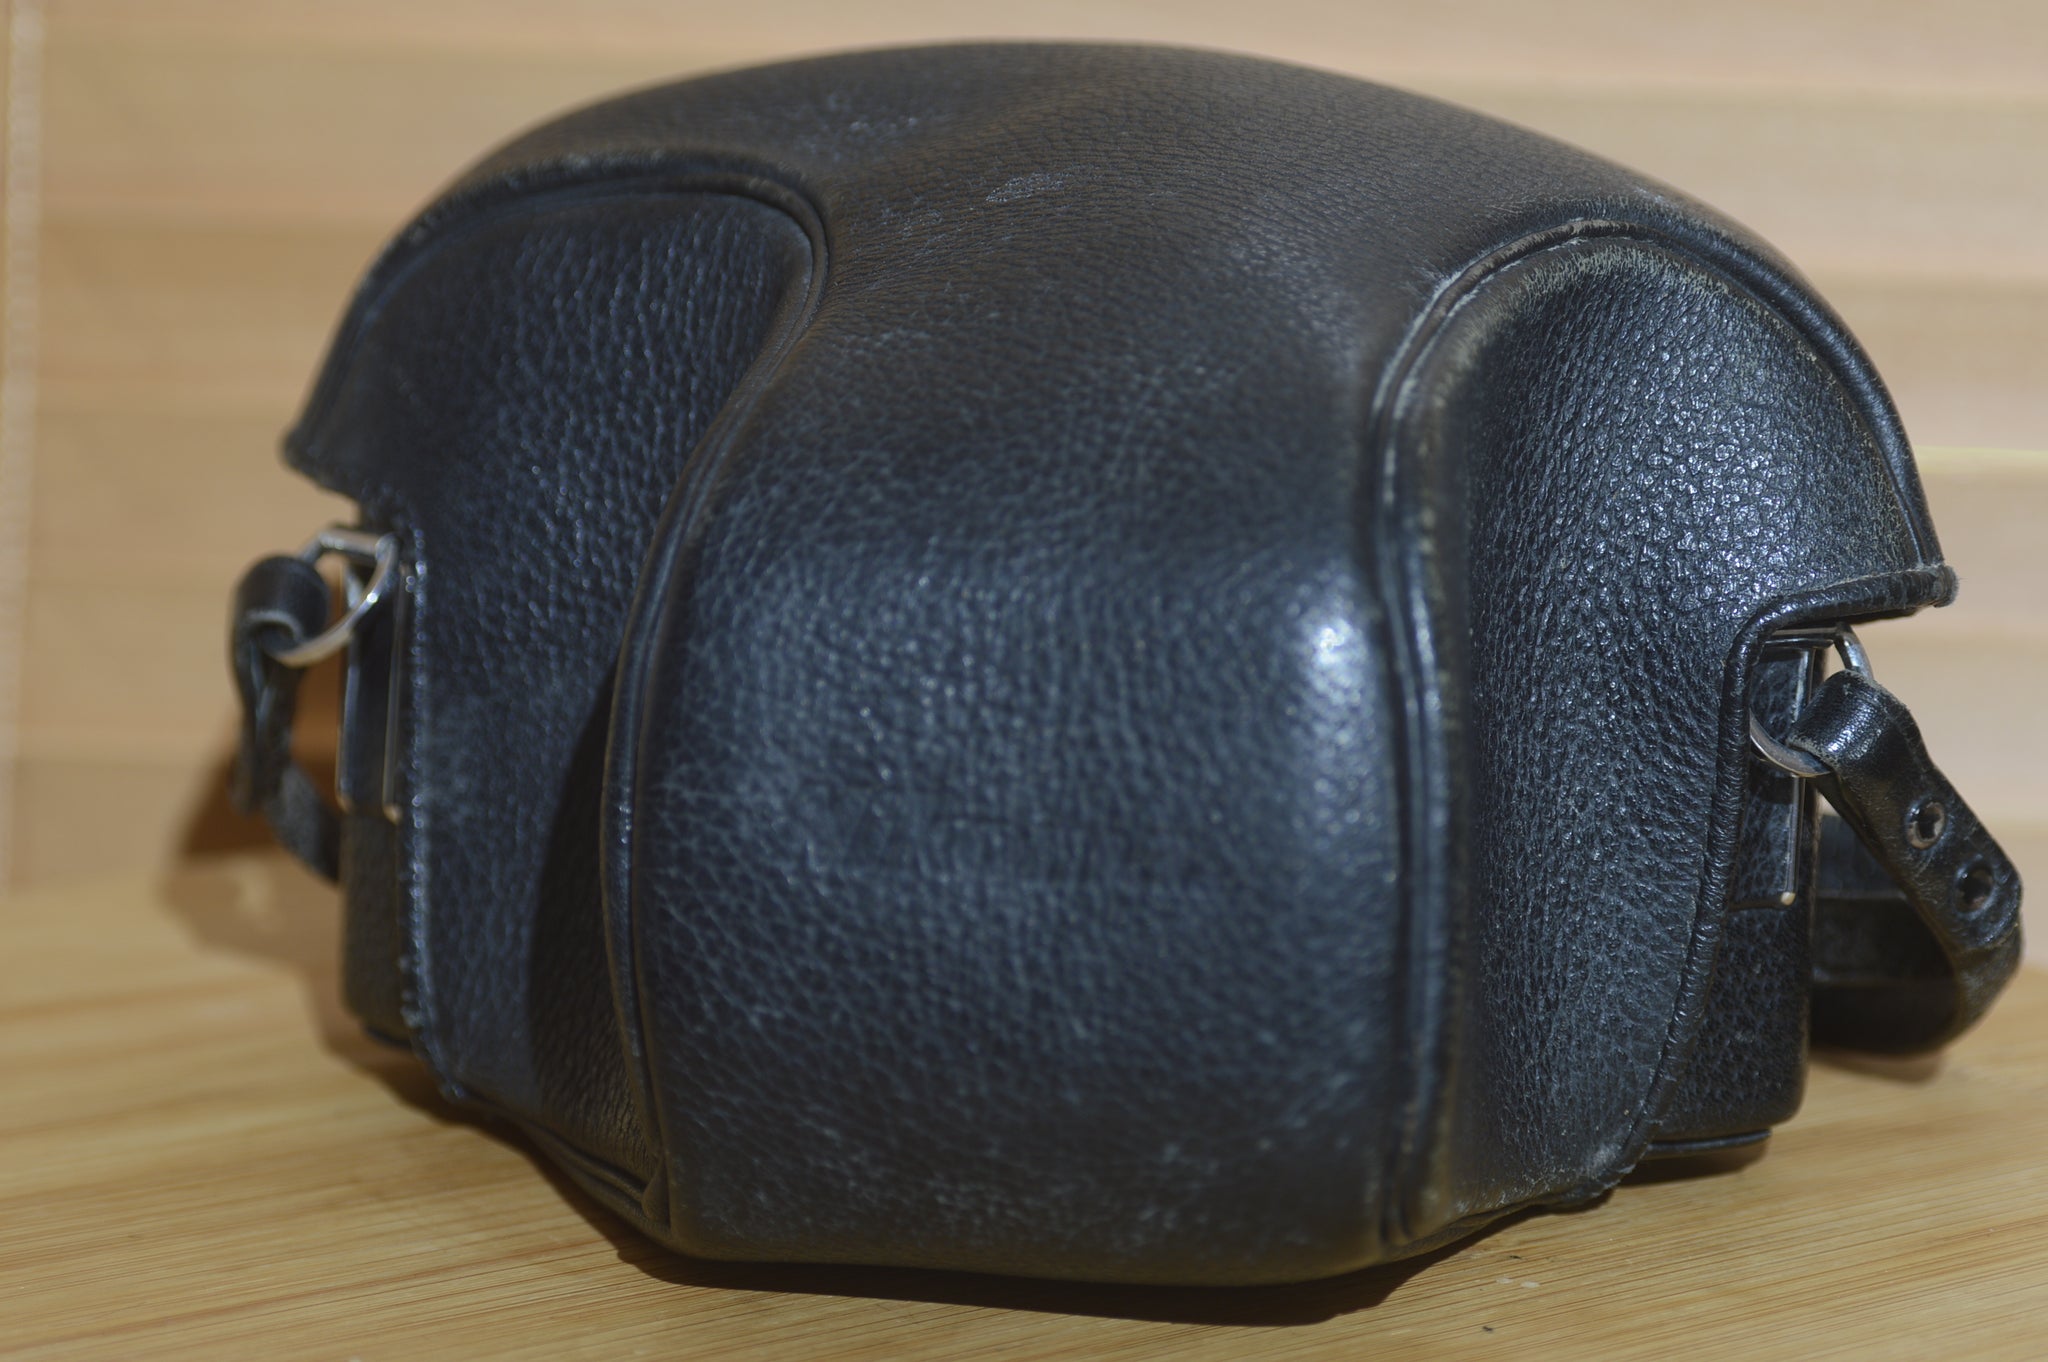 Vintage Nikkormat Black Leather Case with Strap. Ideal for protecting your SLR